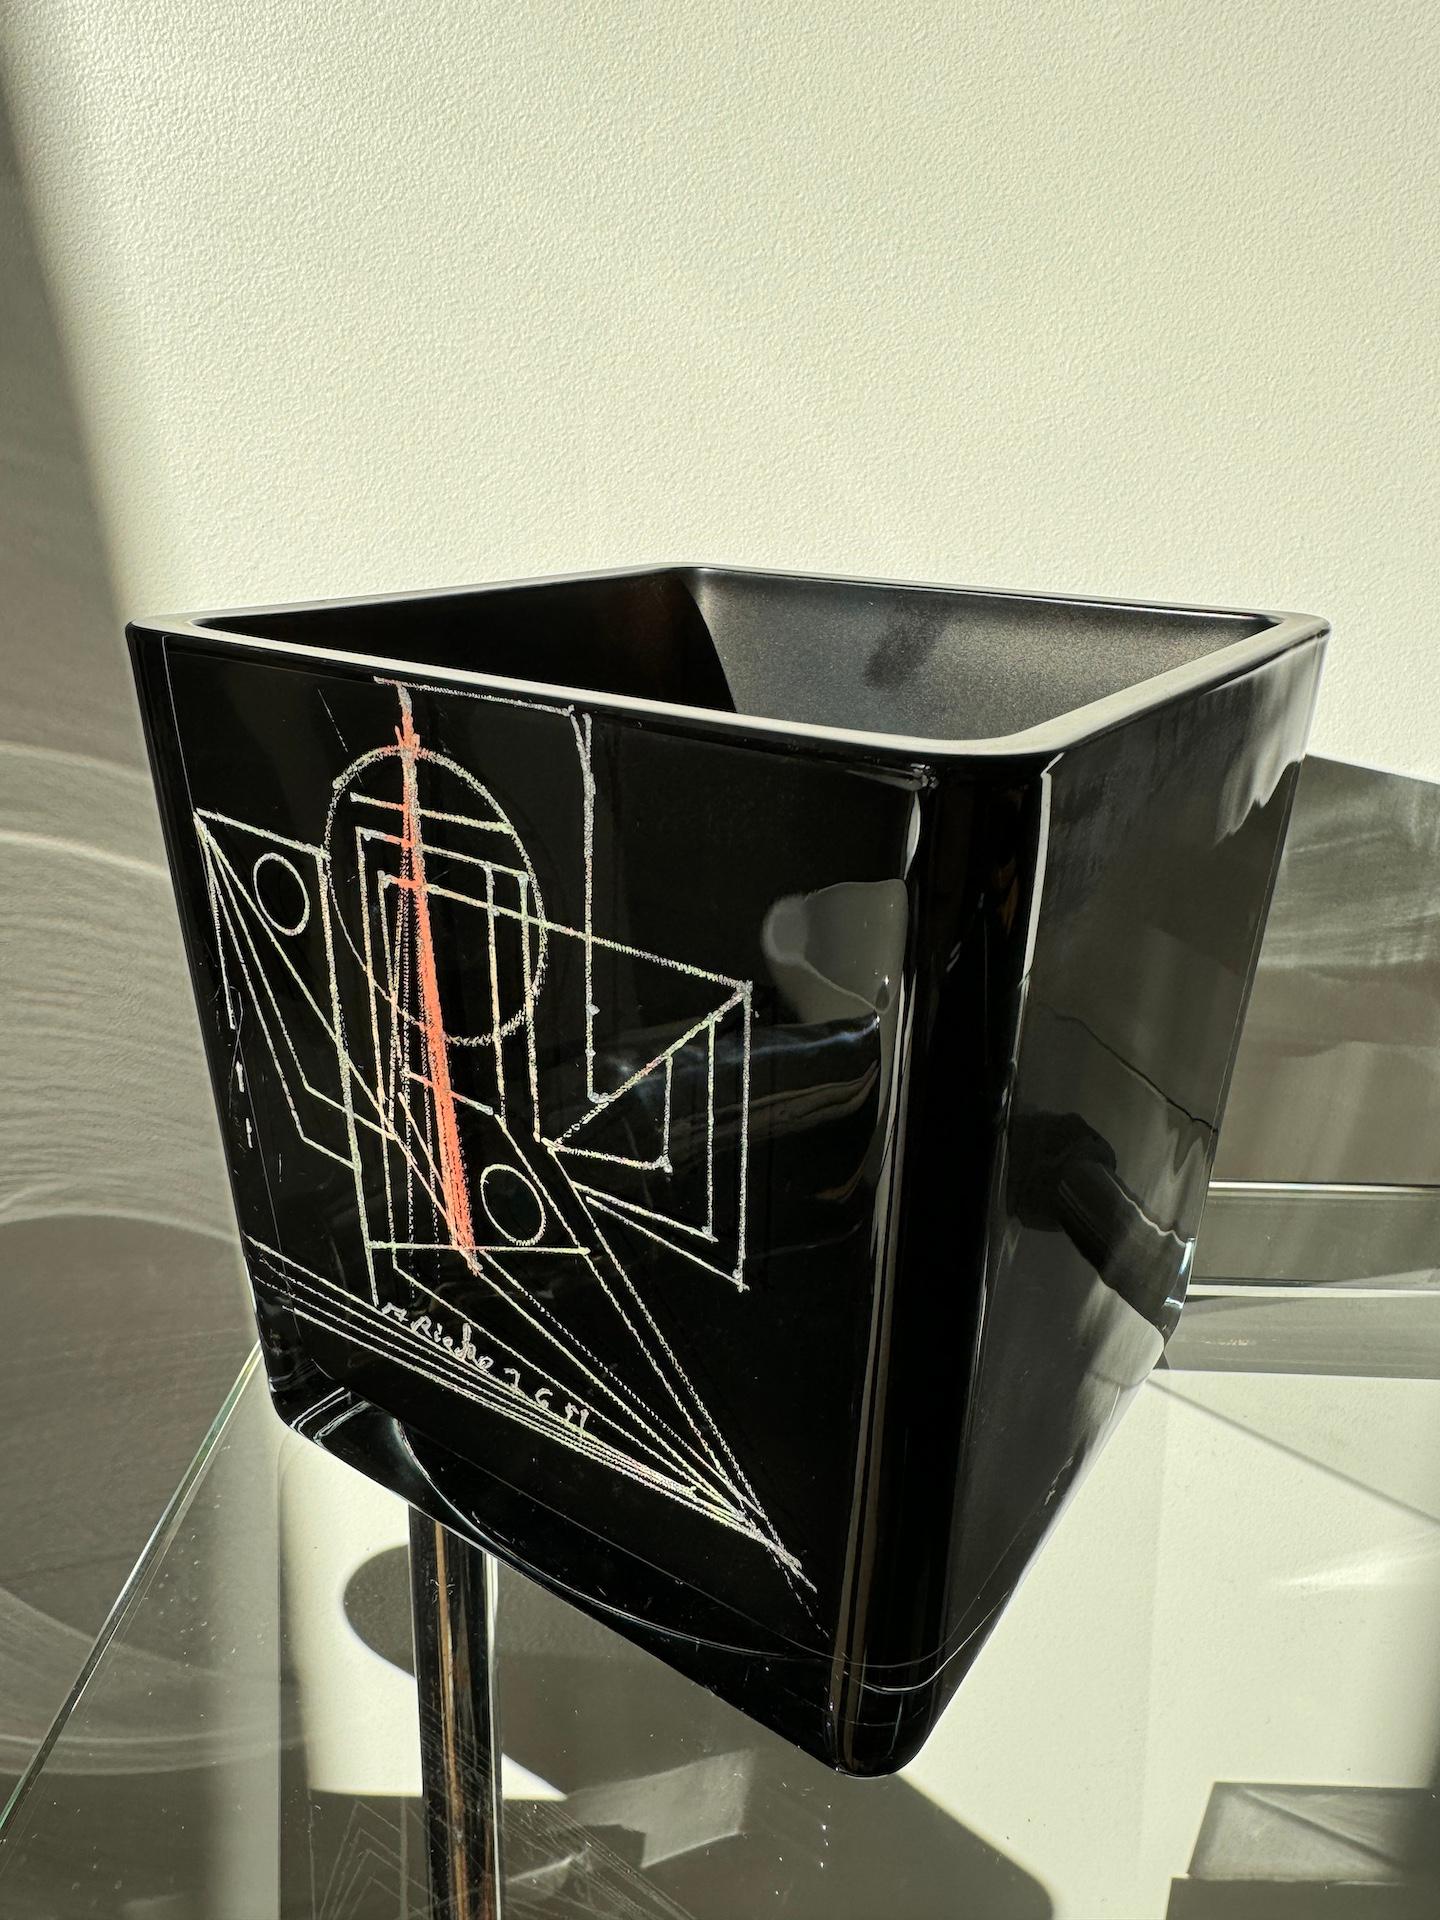 Black Opaline Cubist Vase by Anatole RIECKE, 1959, Abstract Angel, La Coupole Paris 
This vase is a creation of the artist of Russian origin who lived in Paris at the beginning of the 20th century. Riecke participated in the decoration of the famous